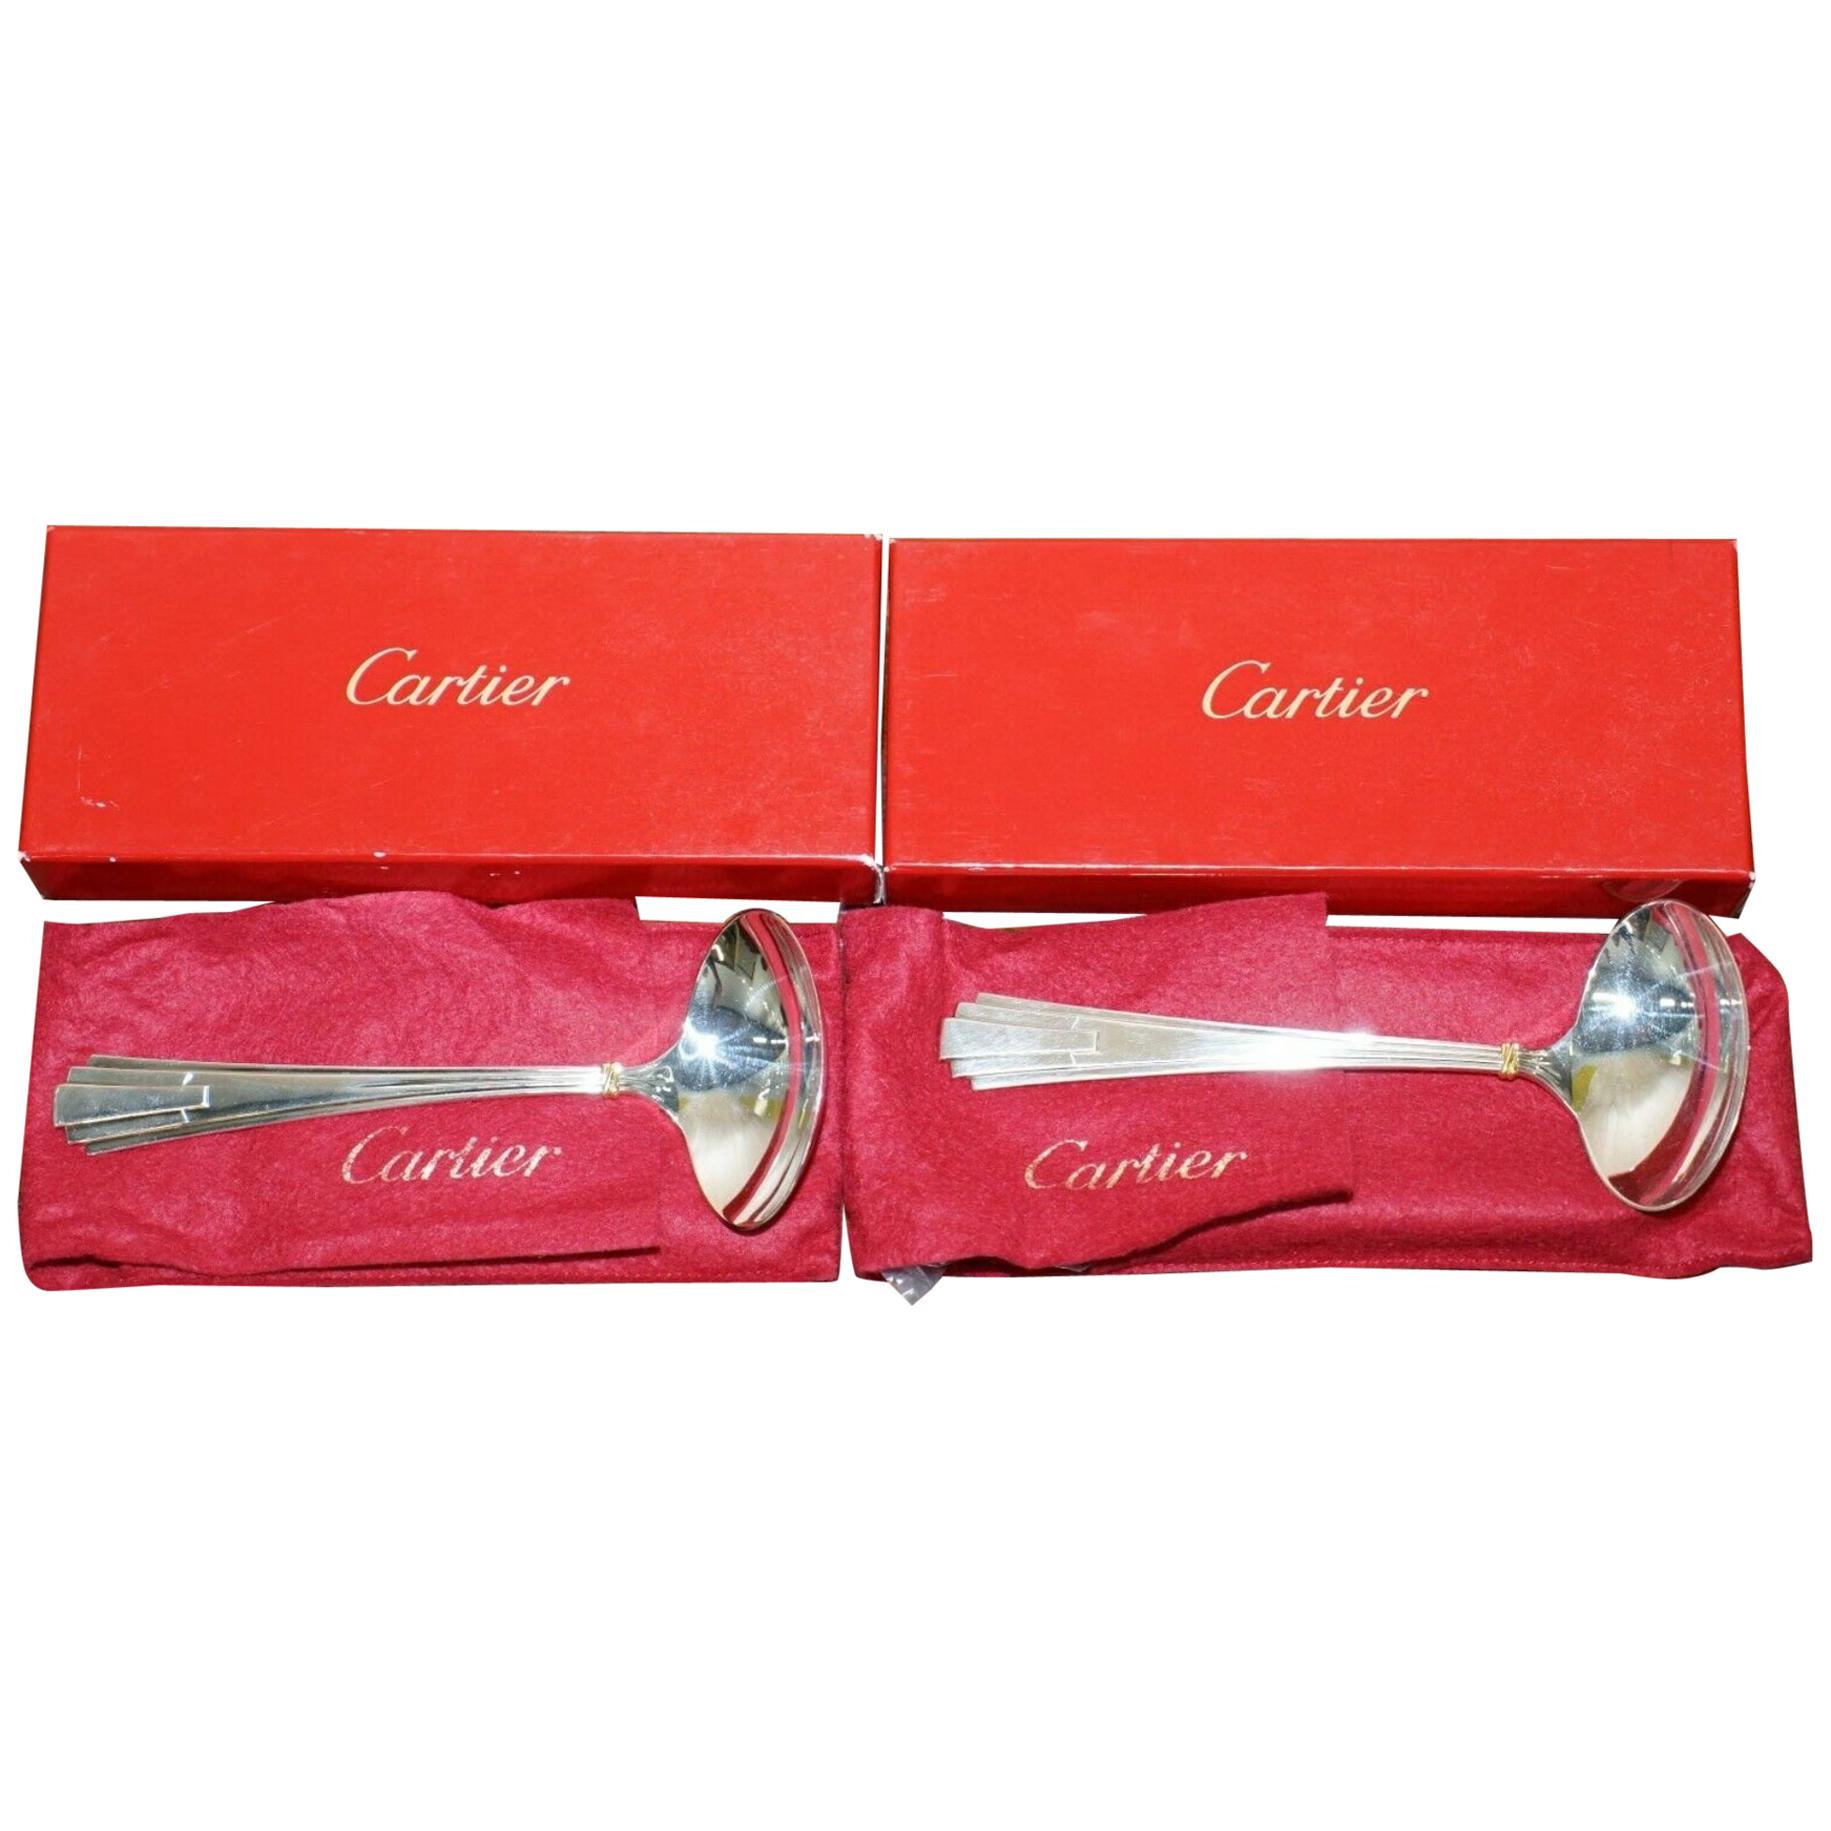 Pair of Cartier Solid Sterling Silver and Gold Gravy Ladles